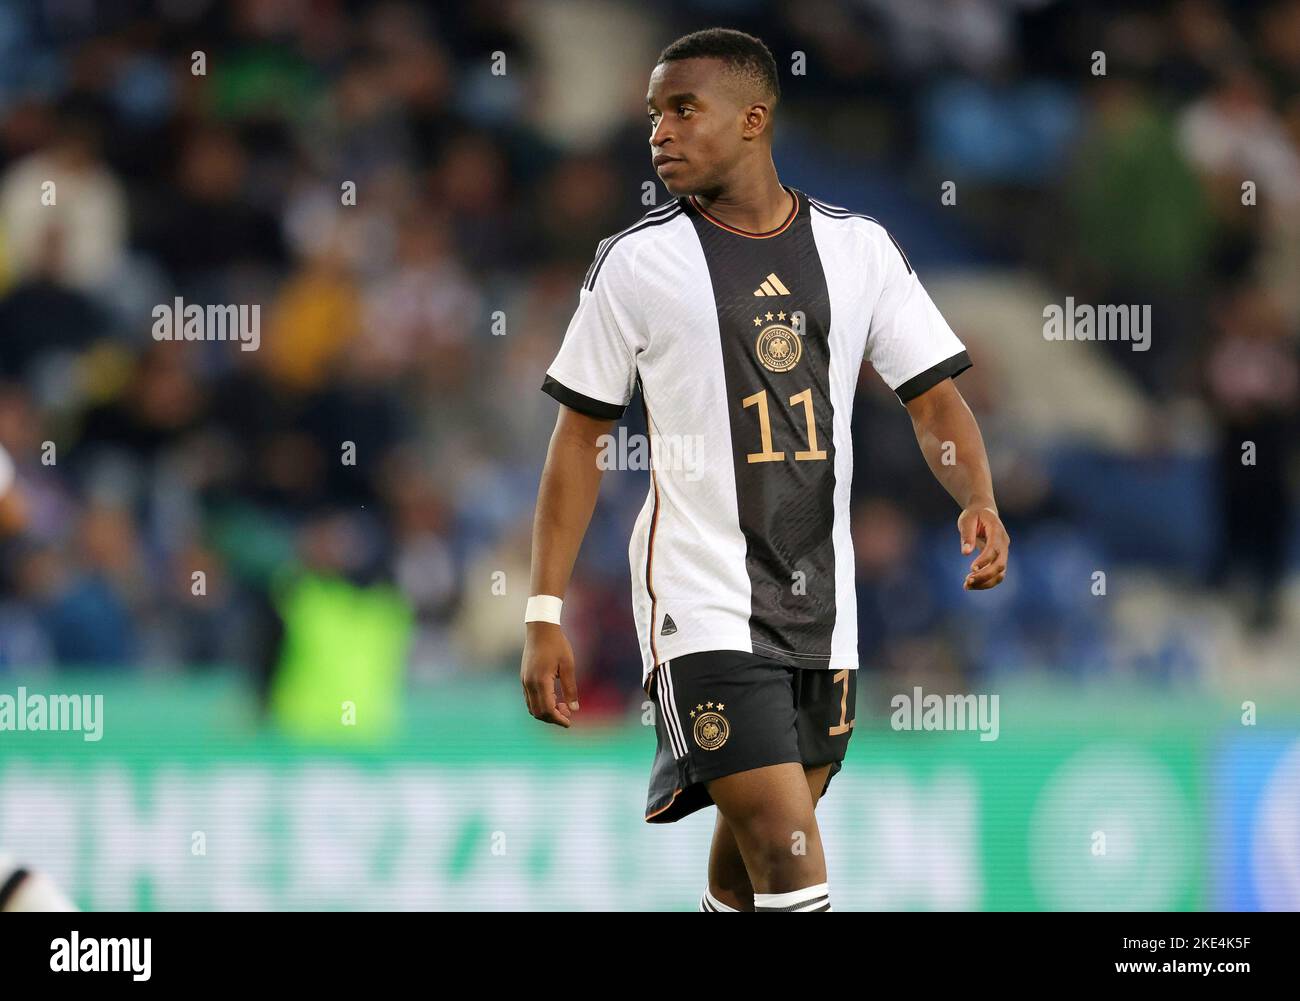 Magdeburg, Deutschland. 23rd Sep, 2022. firo: 23.09.2022, football, GERMANY, U21, U 21 NATIONAL TEAM Germany - France 0:1 Youssoufa Moukoko, gesture, disappointed, disappointment, half figure Credit: dpa/Alamy Live News Stock Photo